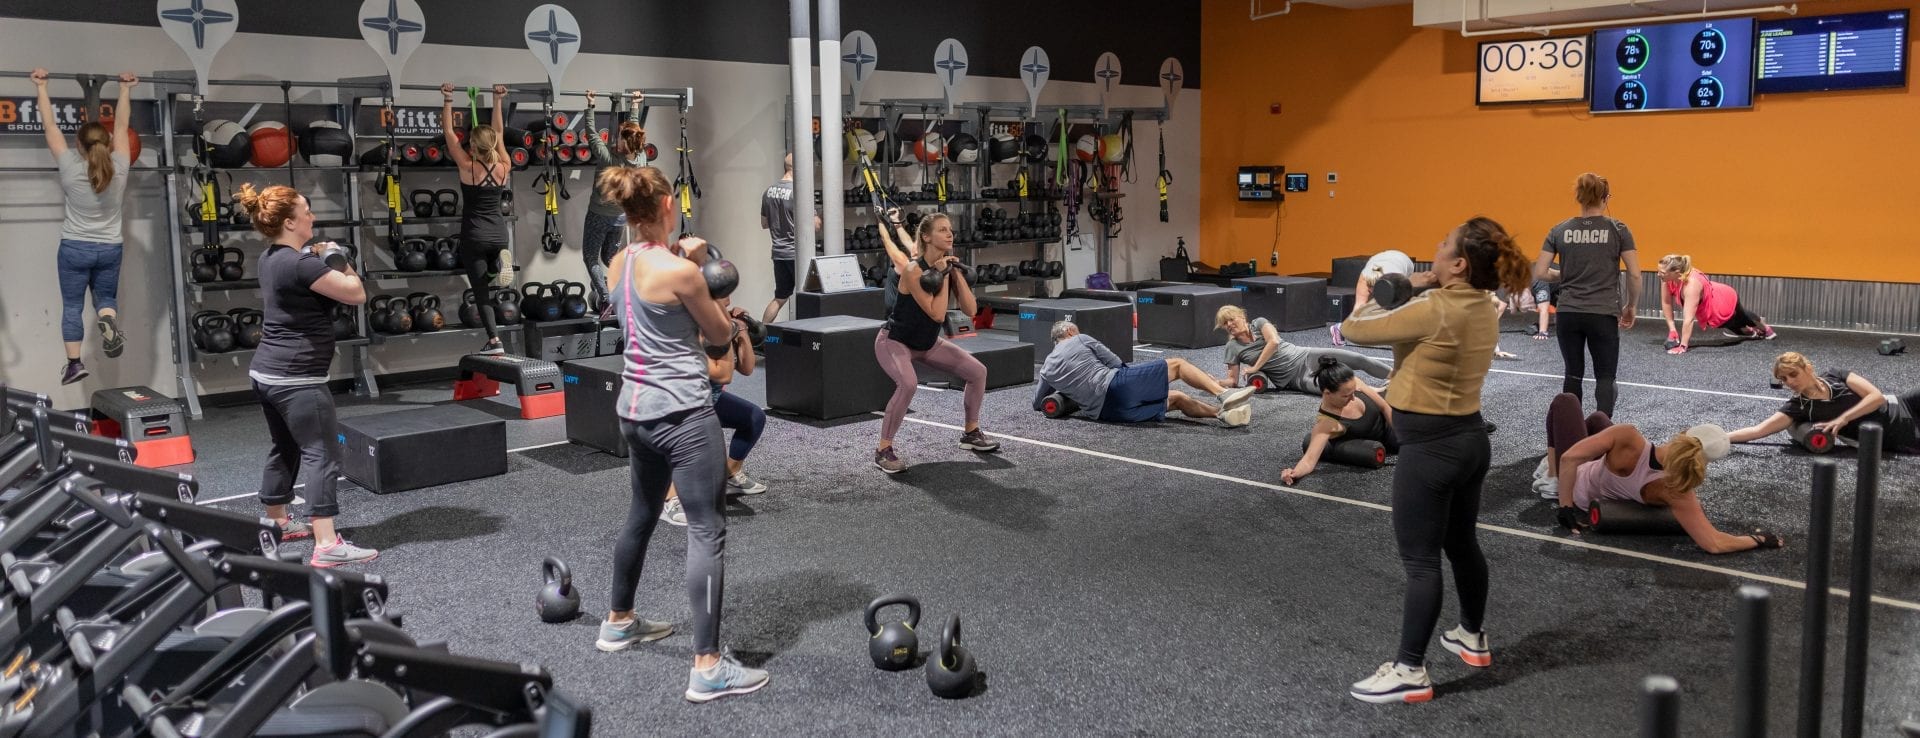 Best Fitness Gyms | Fitness Centers in Greater Boston